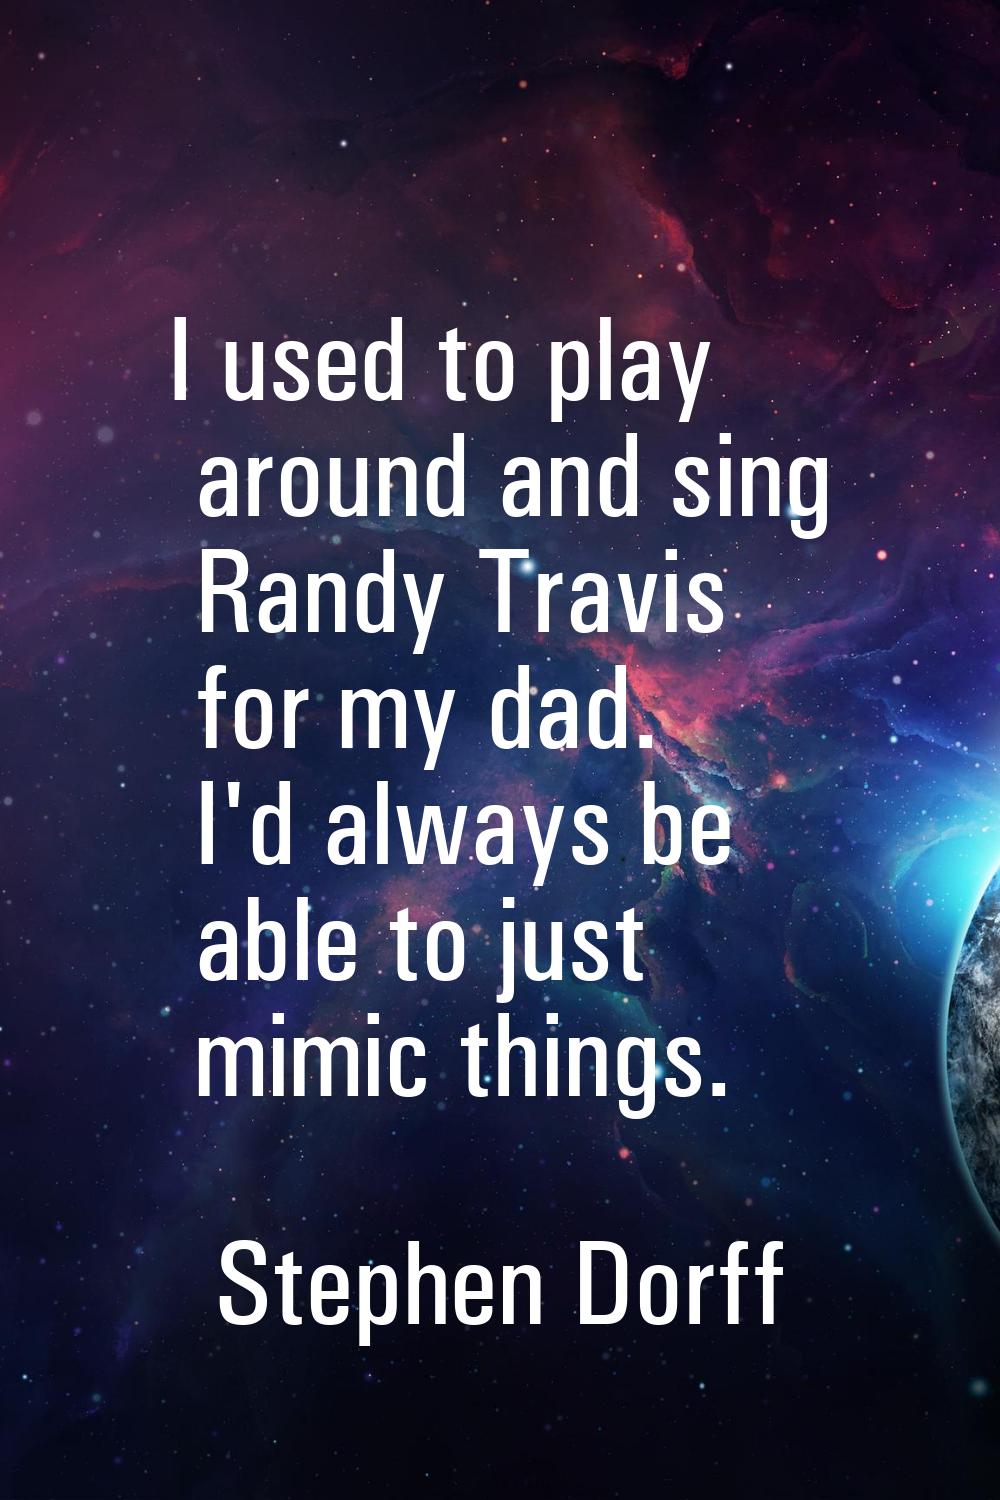 I used to play around and sing Randy Travis for my dad. I'd always be able to just mimic things.